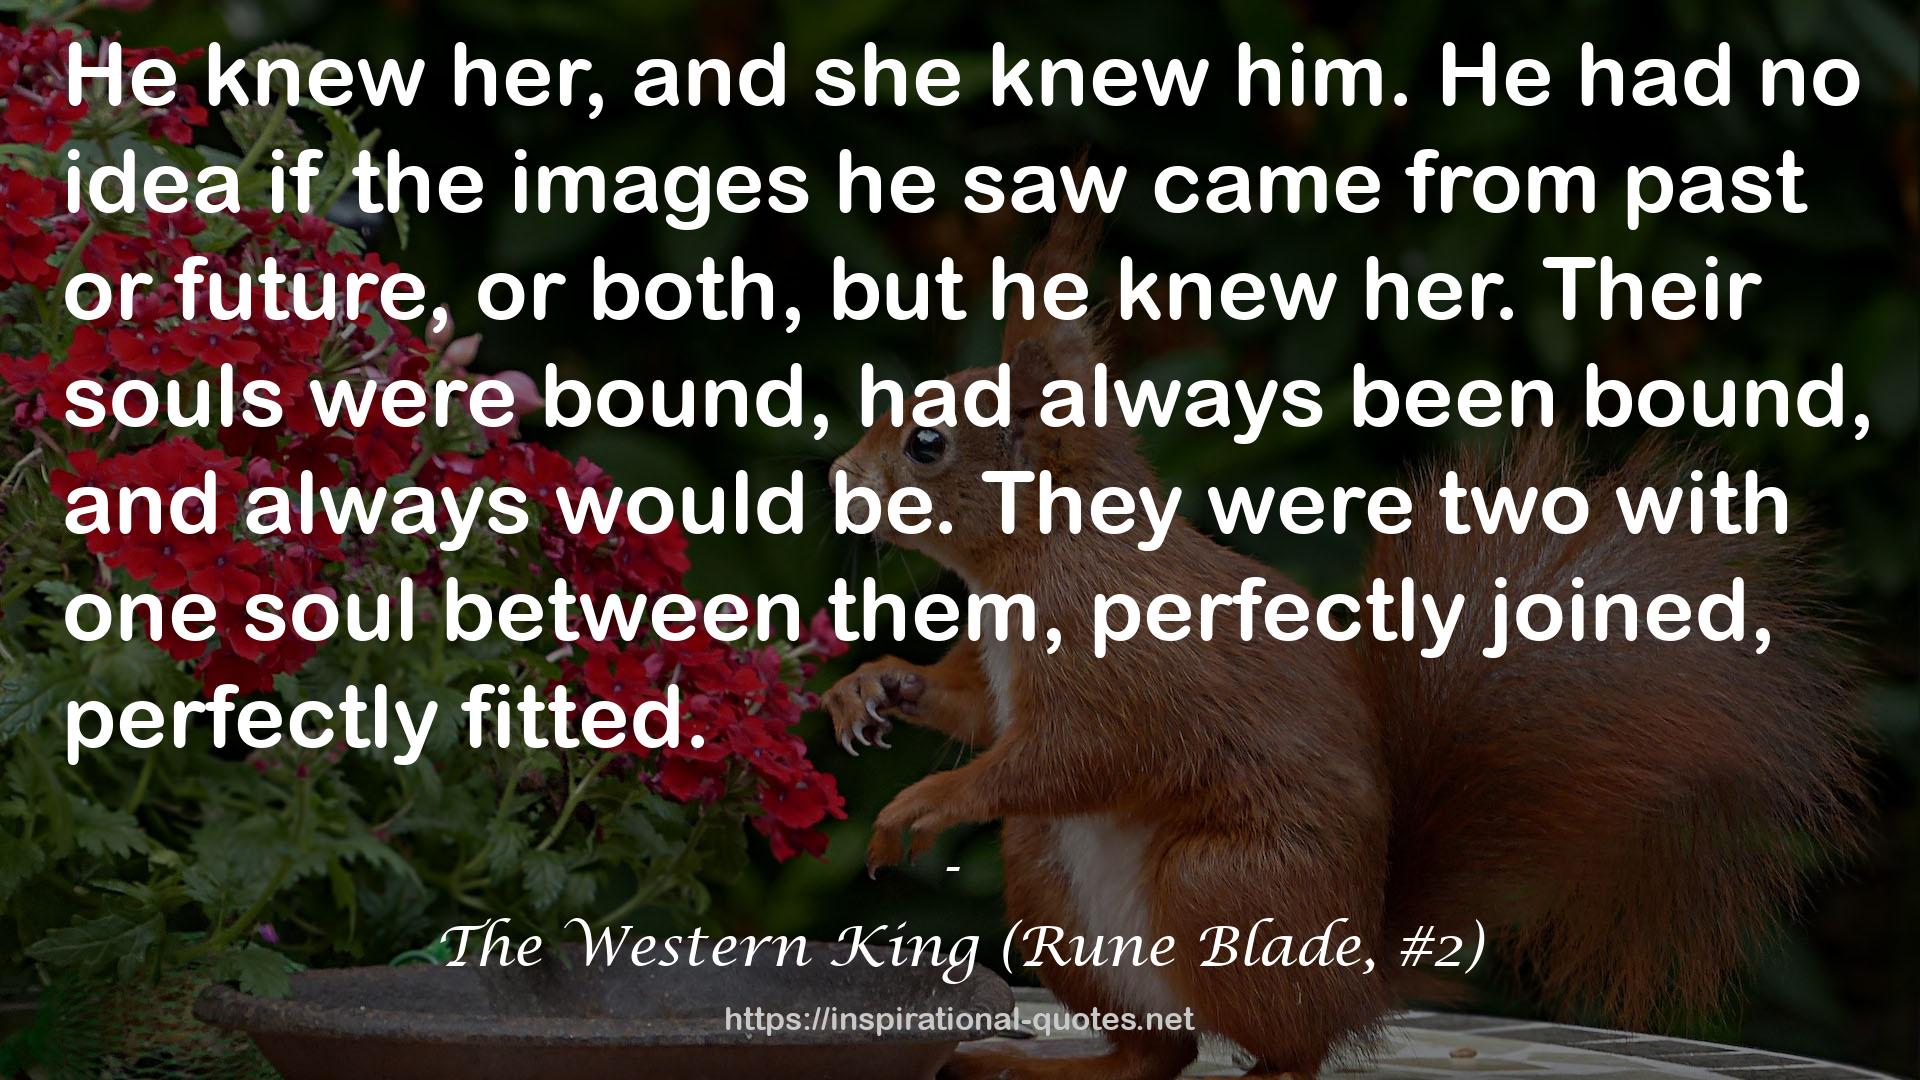 The Western King (Rune Blade, #2) QUOTES